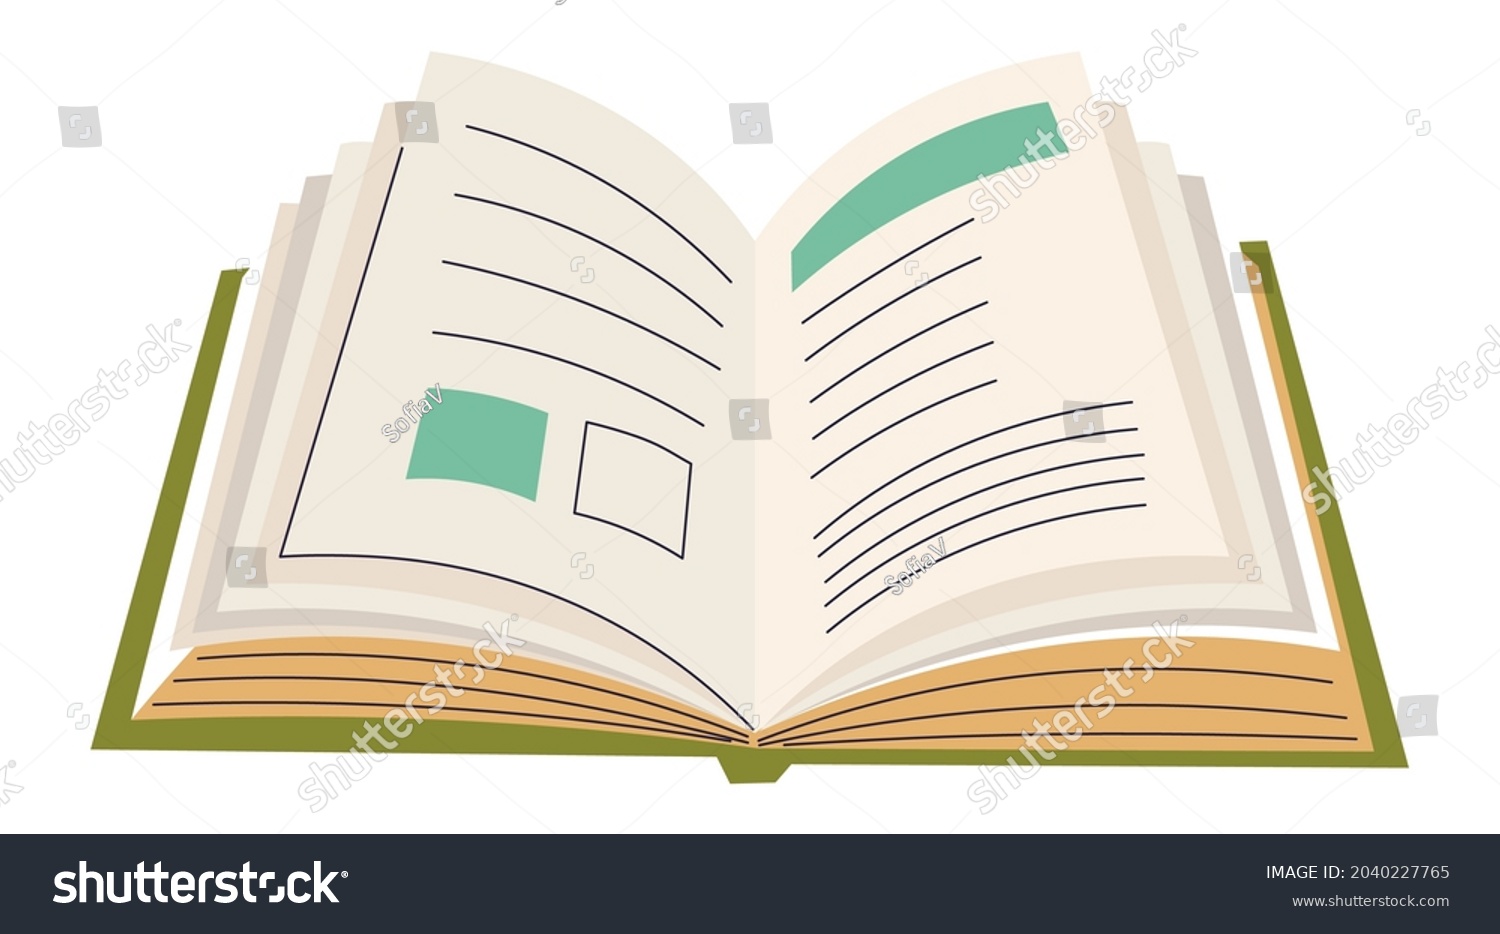 Open book or encyclopedia, textbook for students in school or university. Isolated publication with pictures and text. Personal journal or magazine, notebook copybook for notes. Vector in flat style #2040227765